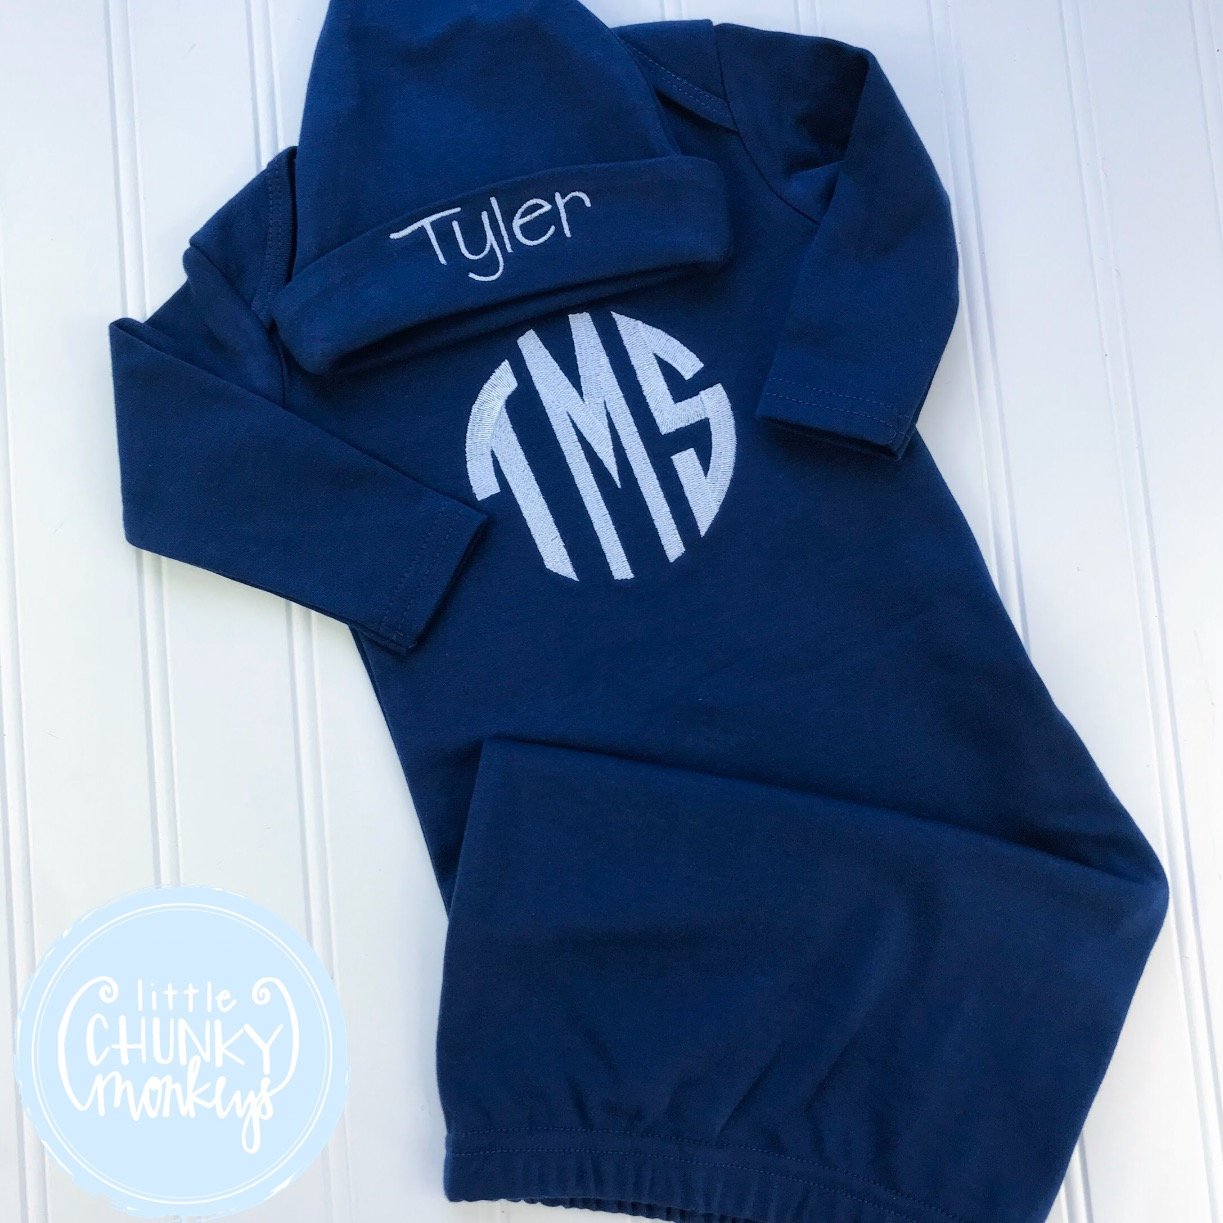 Baby Boy Gown - Bring Home Shirt - Personalized Newborn Name Gown + Cap in Navy Blue